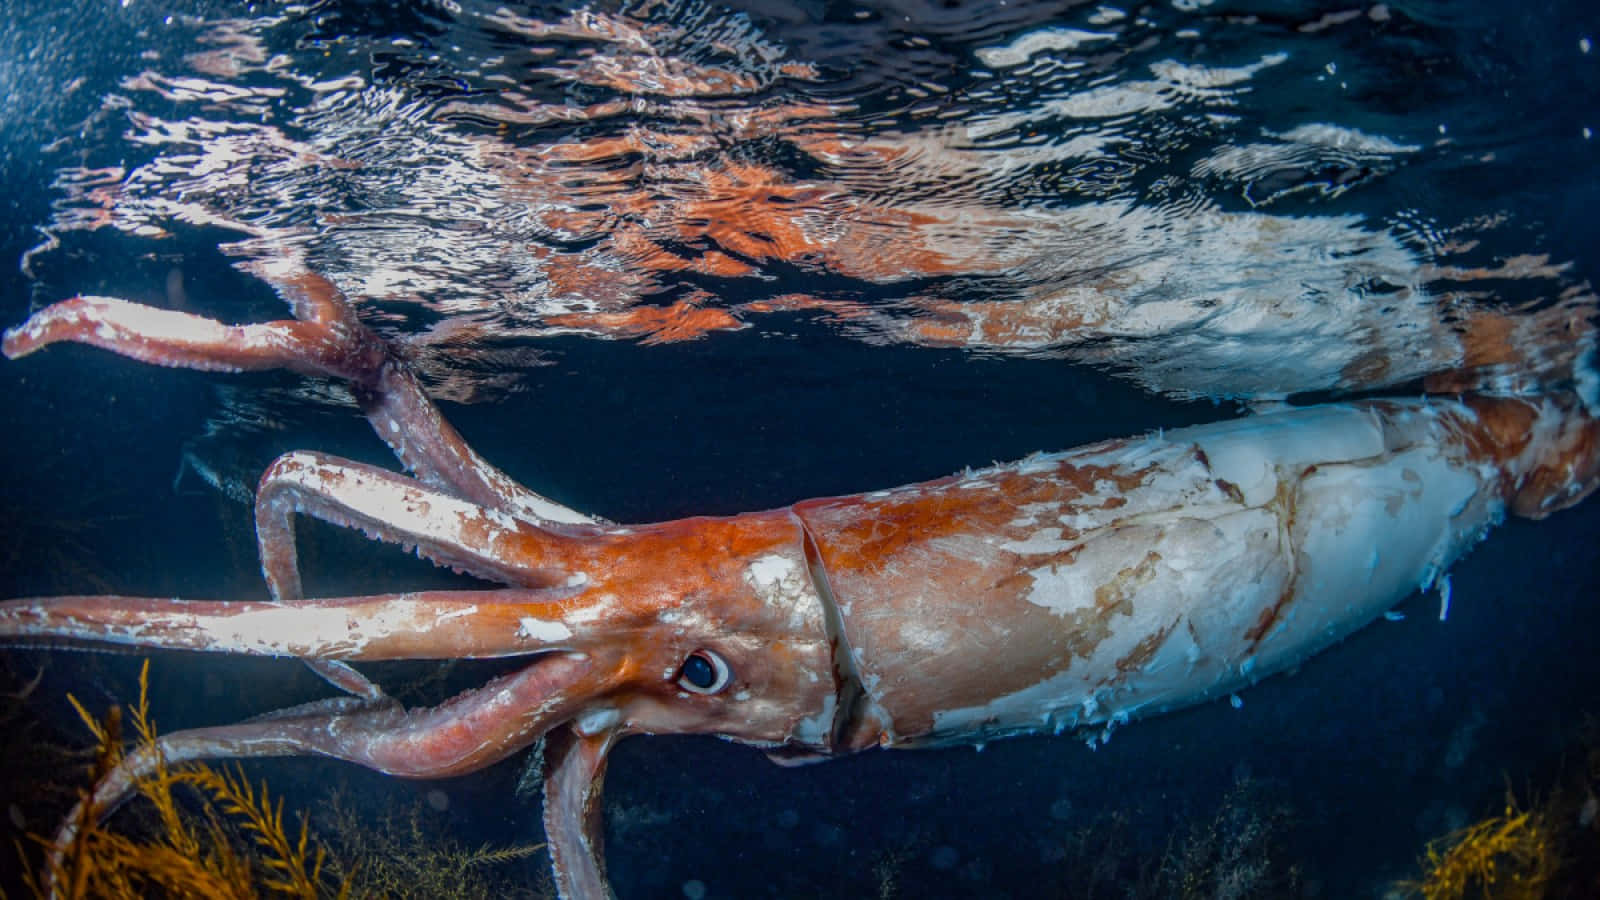 A Giant Squid Swimming in the Ocean